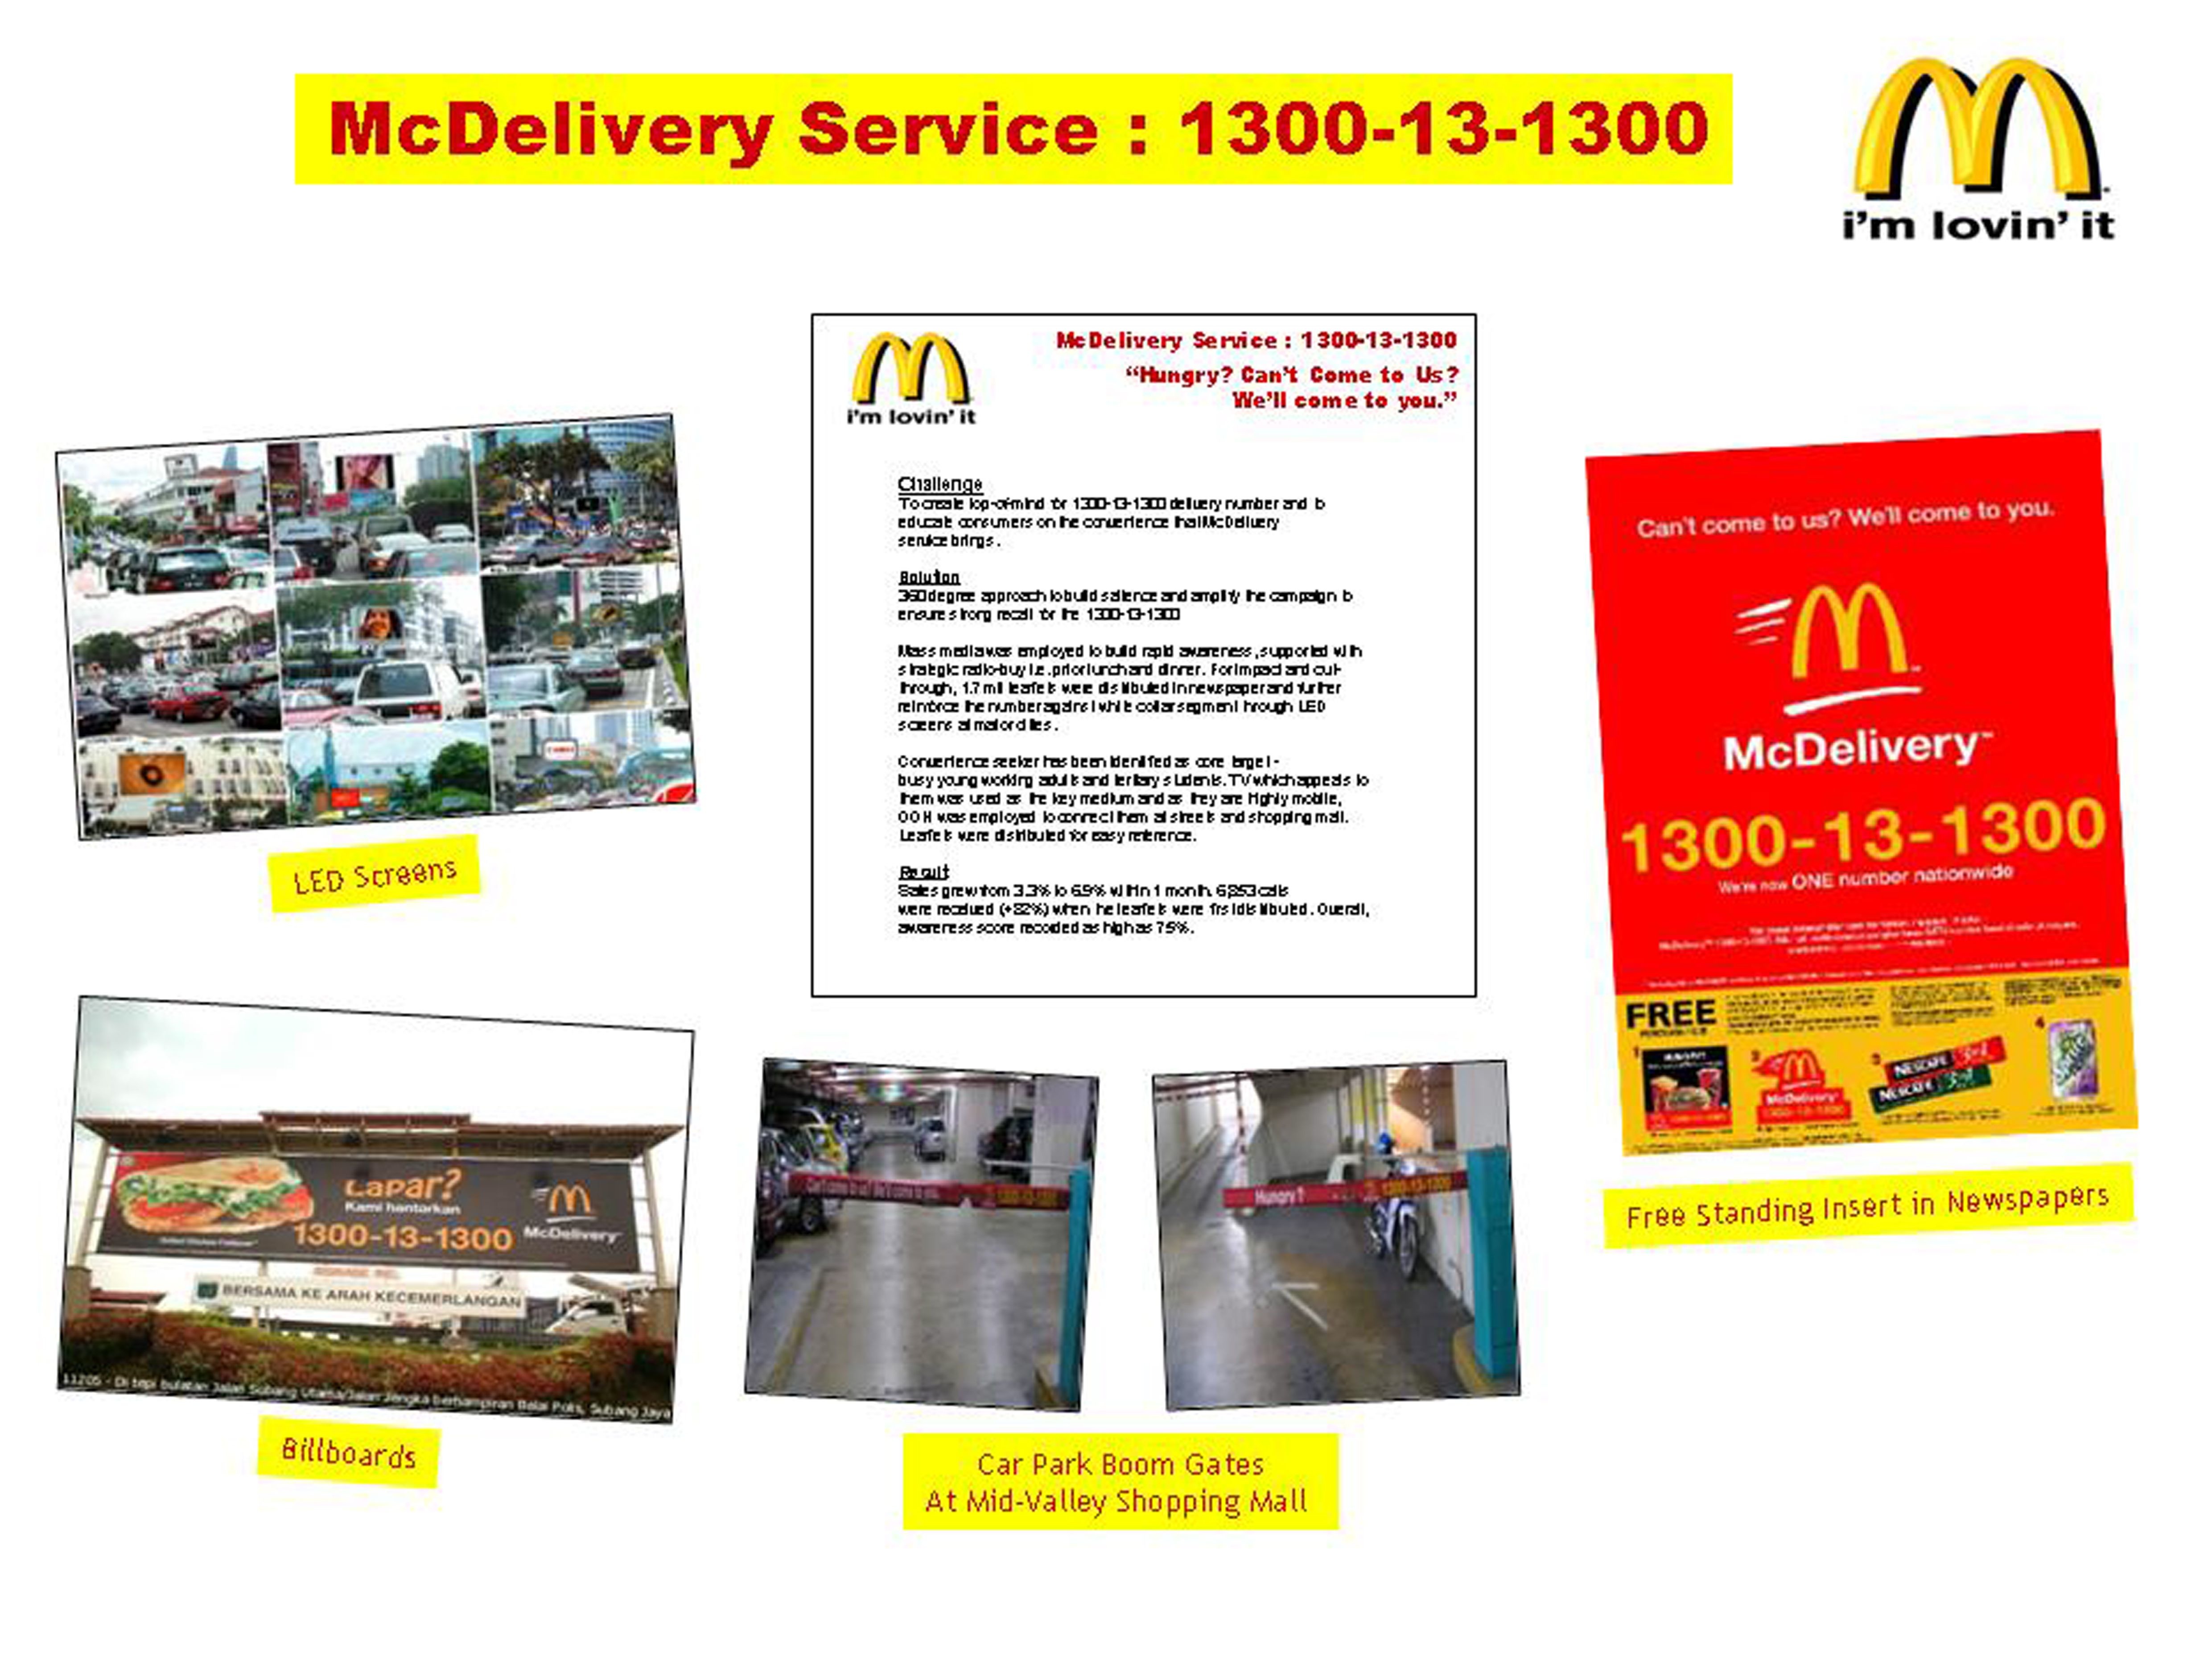 McDELIVERY SERVICE